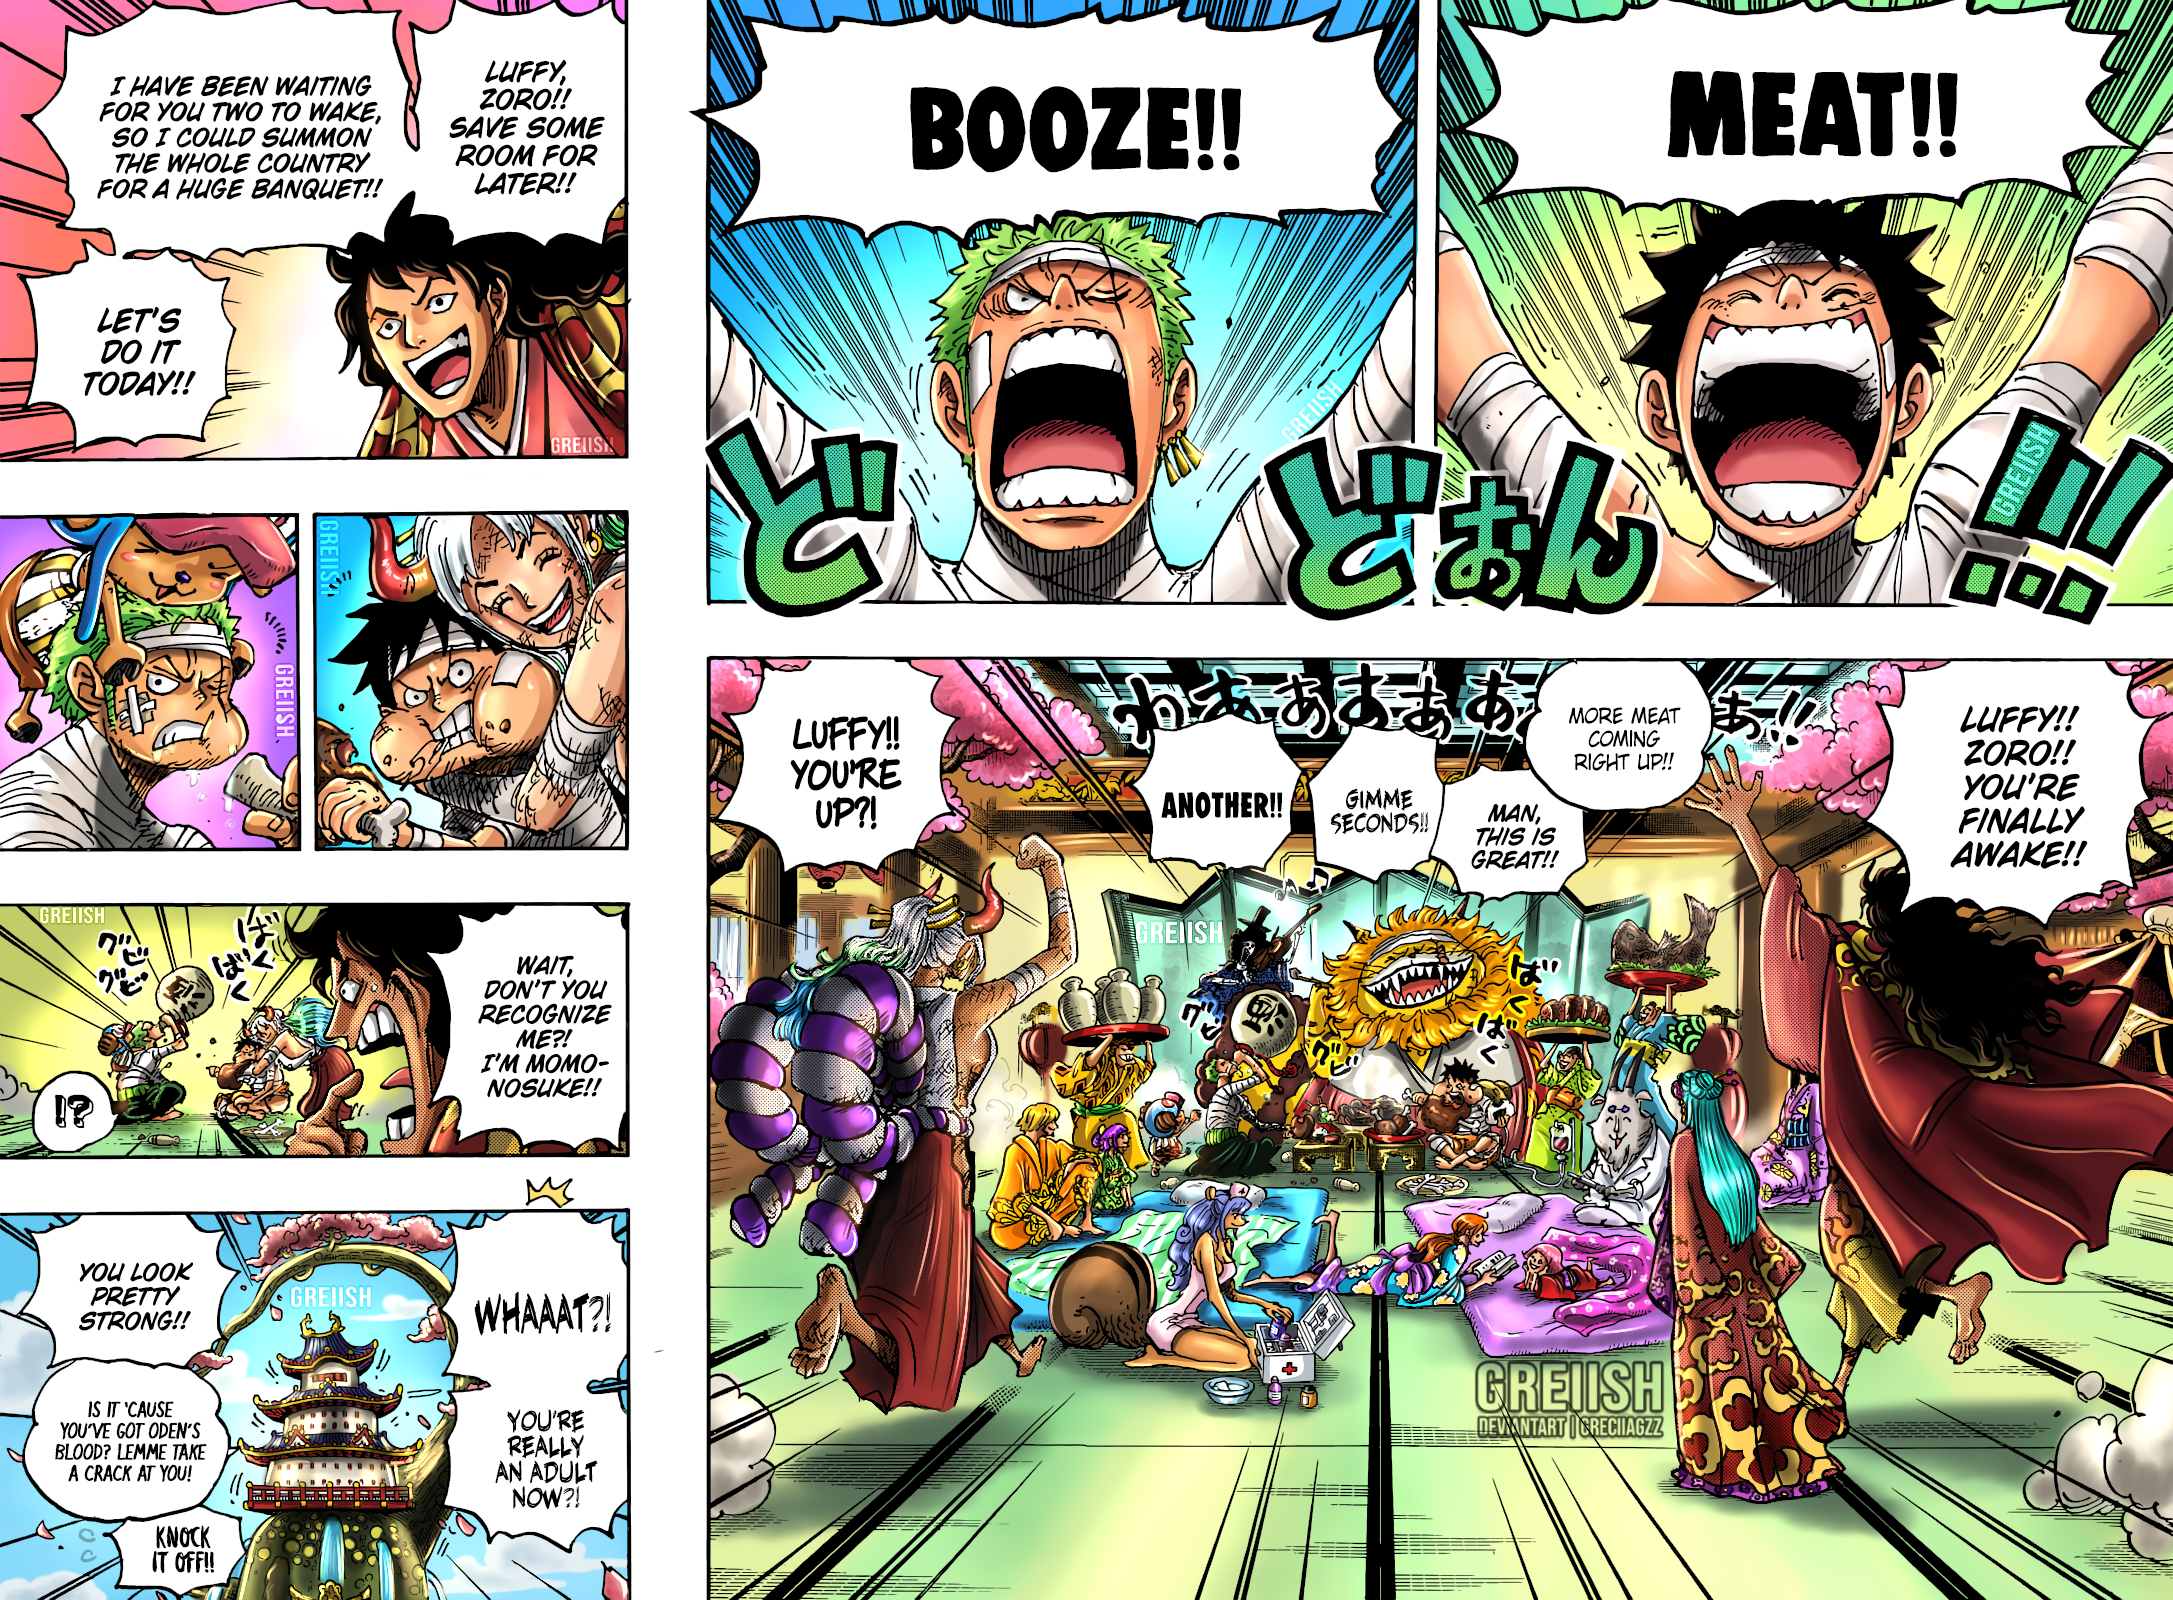 One piece chapter 1057 colored by me (and full colored on